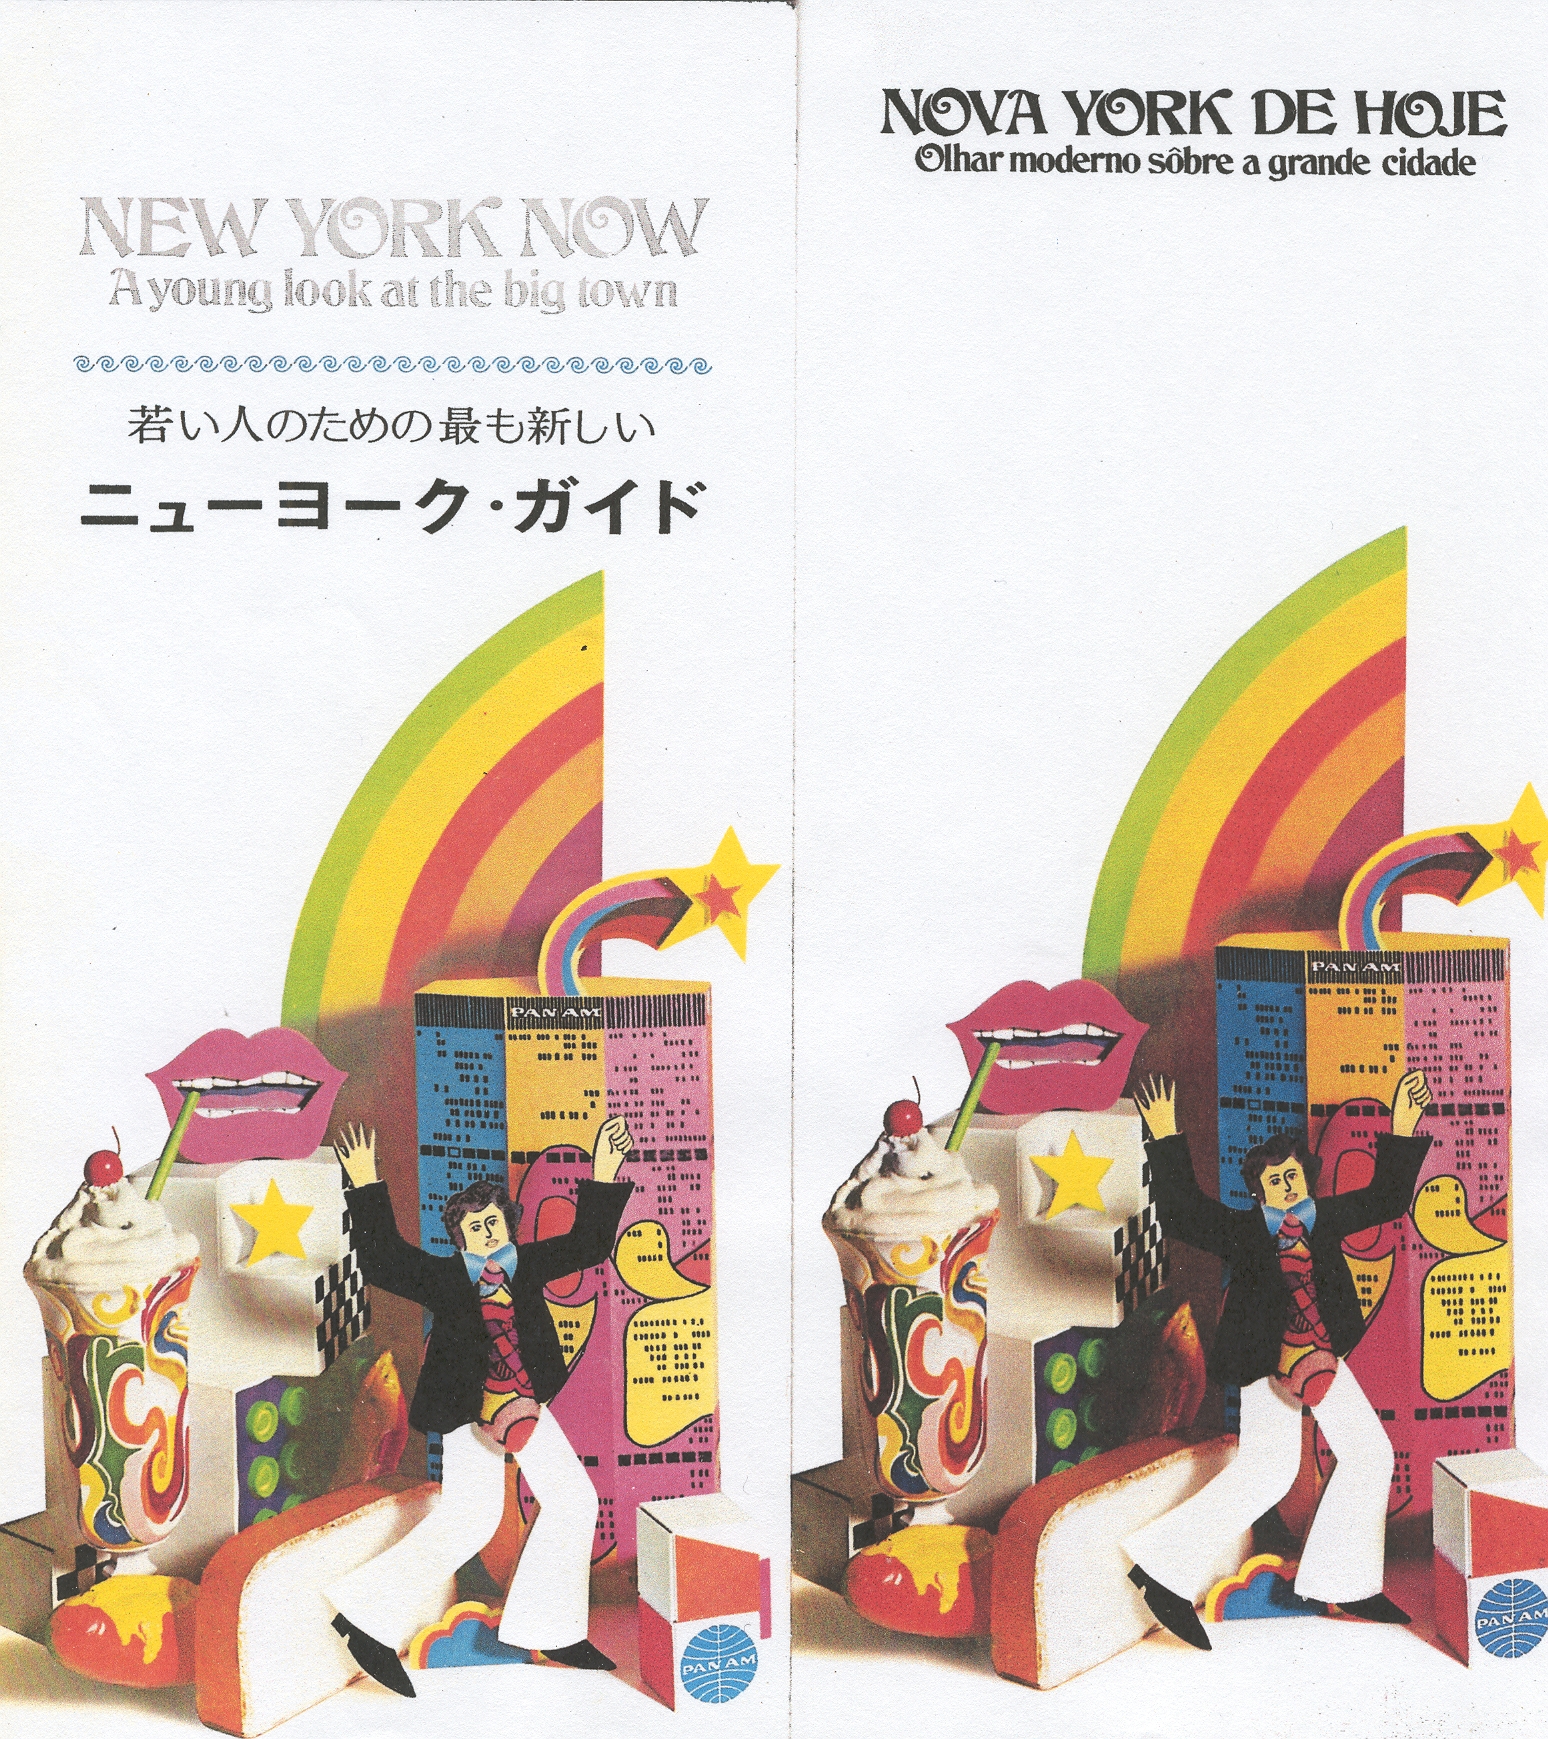 Sample brochure covers promoting New York in Japanese  from the early 1970s